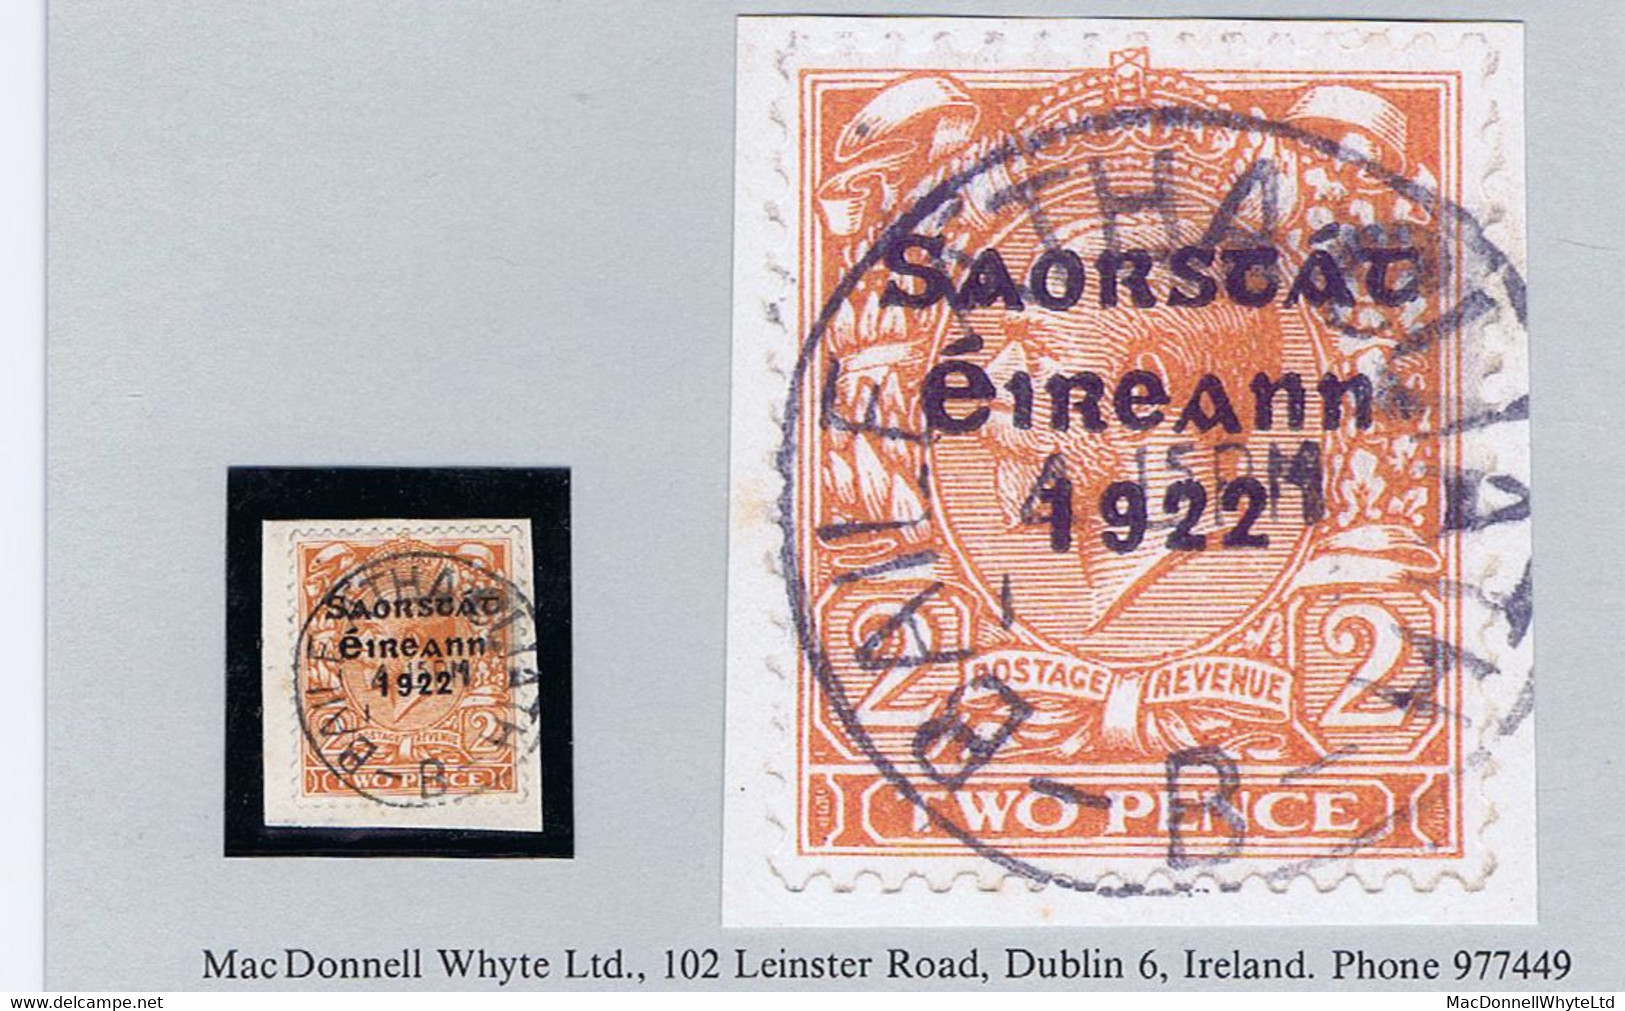 Ireland 1923 Harrison Saorstat Coils, 2d Orange Used On Piece, BAILE ATHA CLIATH With Date Apparently Missing - Gebraucht